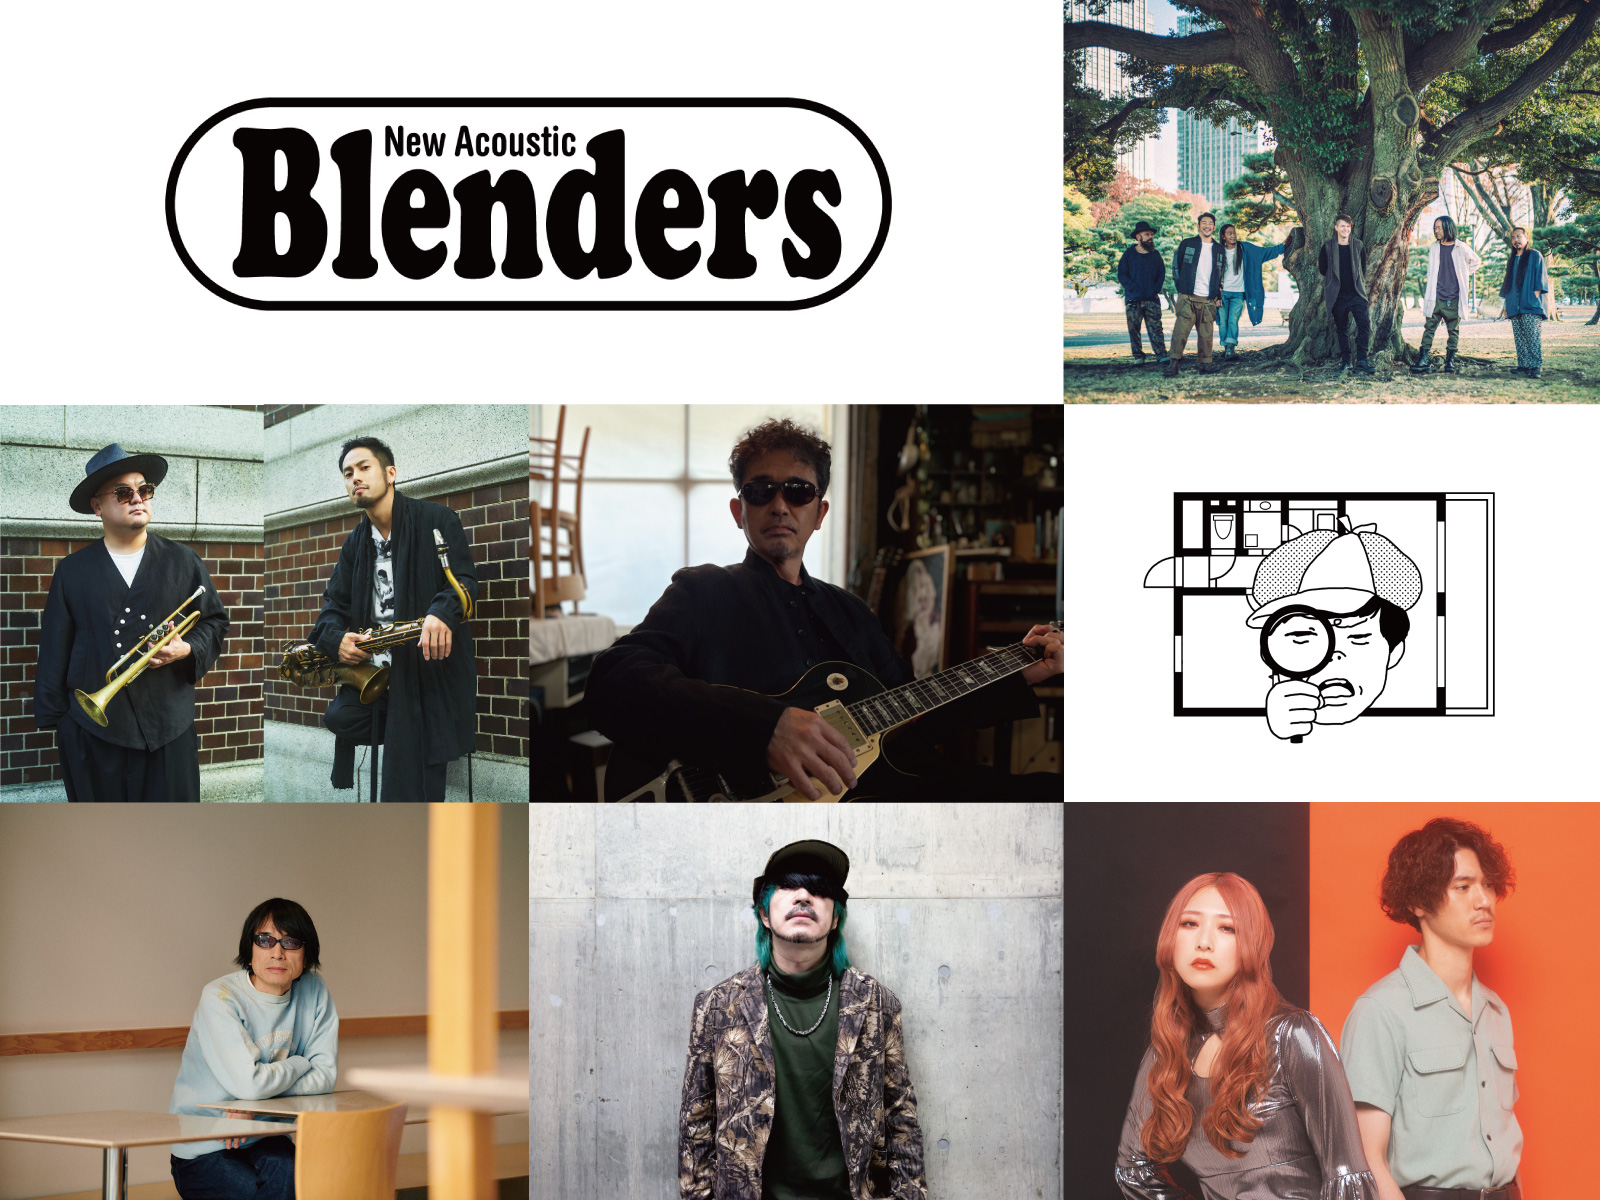 New Acoustic Blenders session